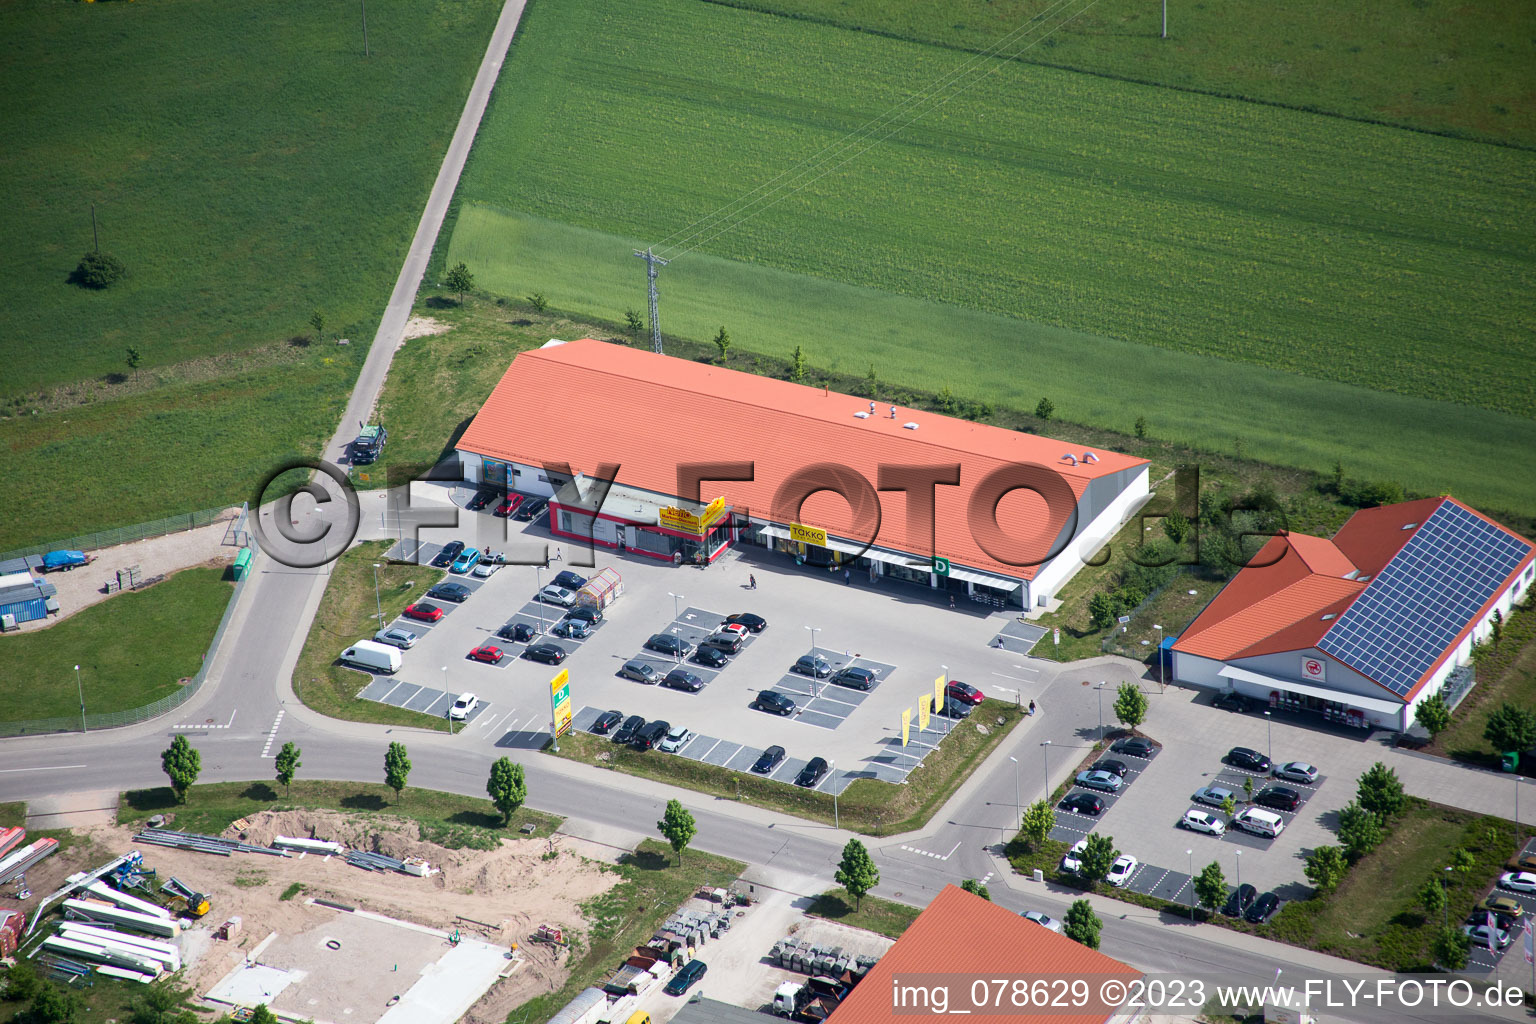 Aerial view of Shopping centers in Neulauterburg in the state Rhineland-Palatinate, Germany